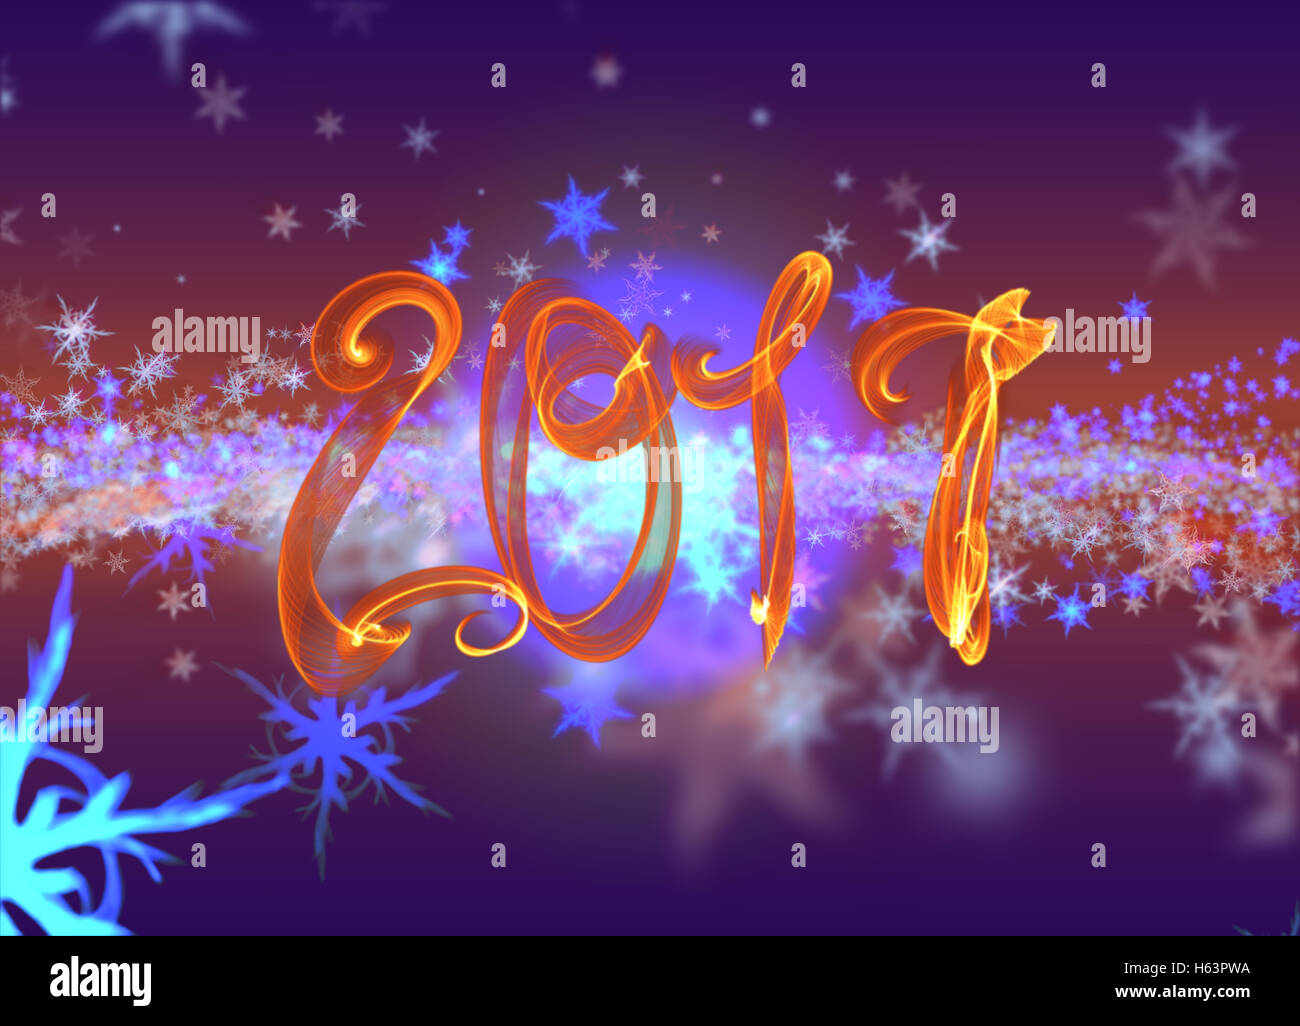 Snowflakes winter field cloud background and 2017 fire flame lettering. Happy new year, Christmas theme blurred bokeh. Stock Photo